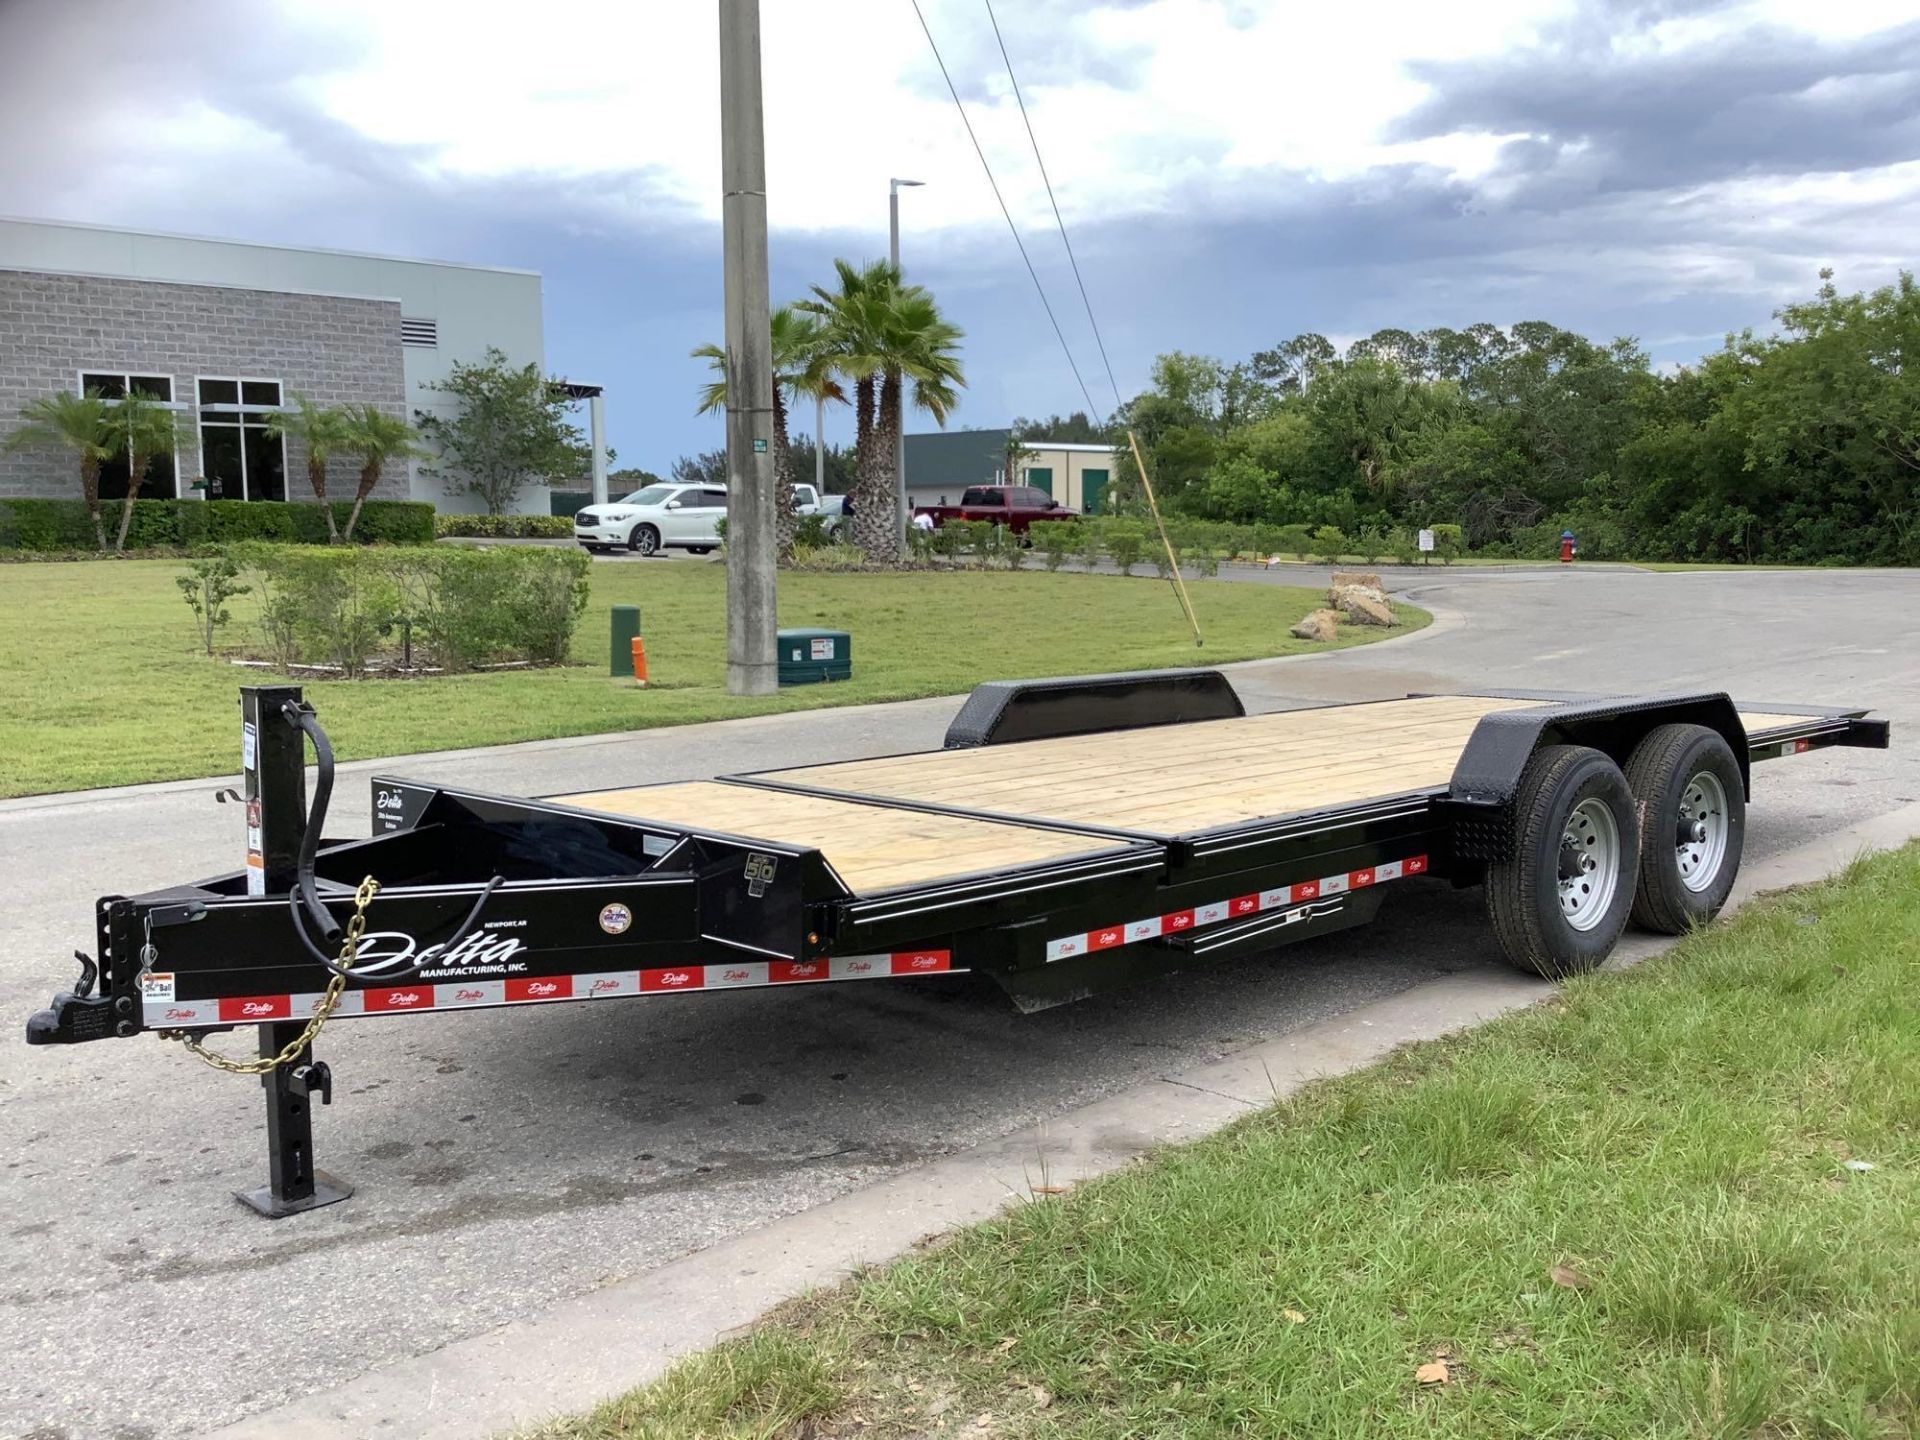 ***UNUSED 2022 DELTA TILT TRAILER, APPROX GVWR 14000LBS, APPROX 22FT LONG x 82” WIDE, ELECTRIC BRAKE